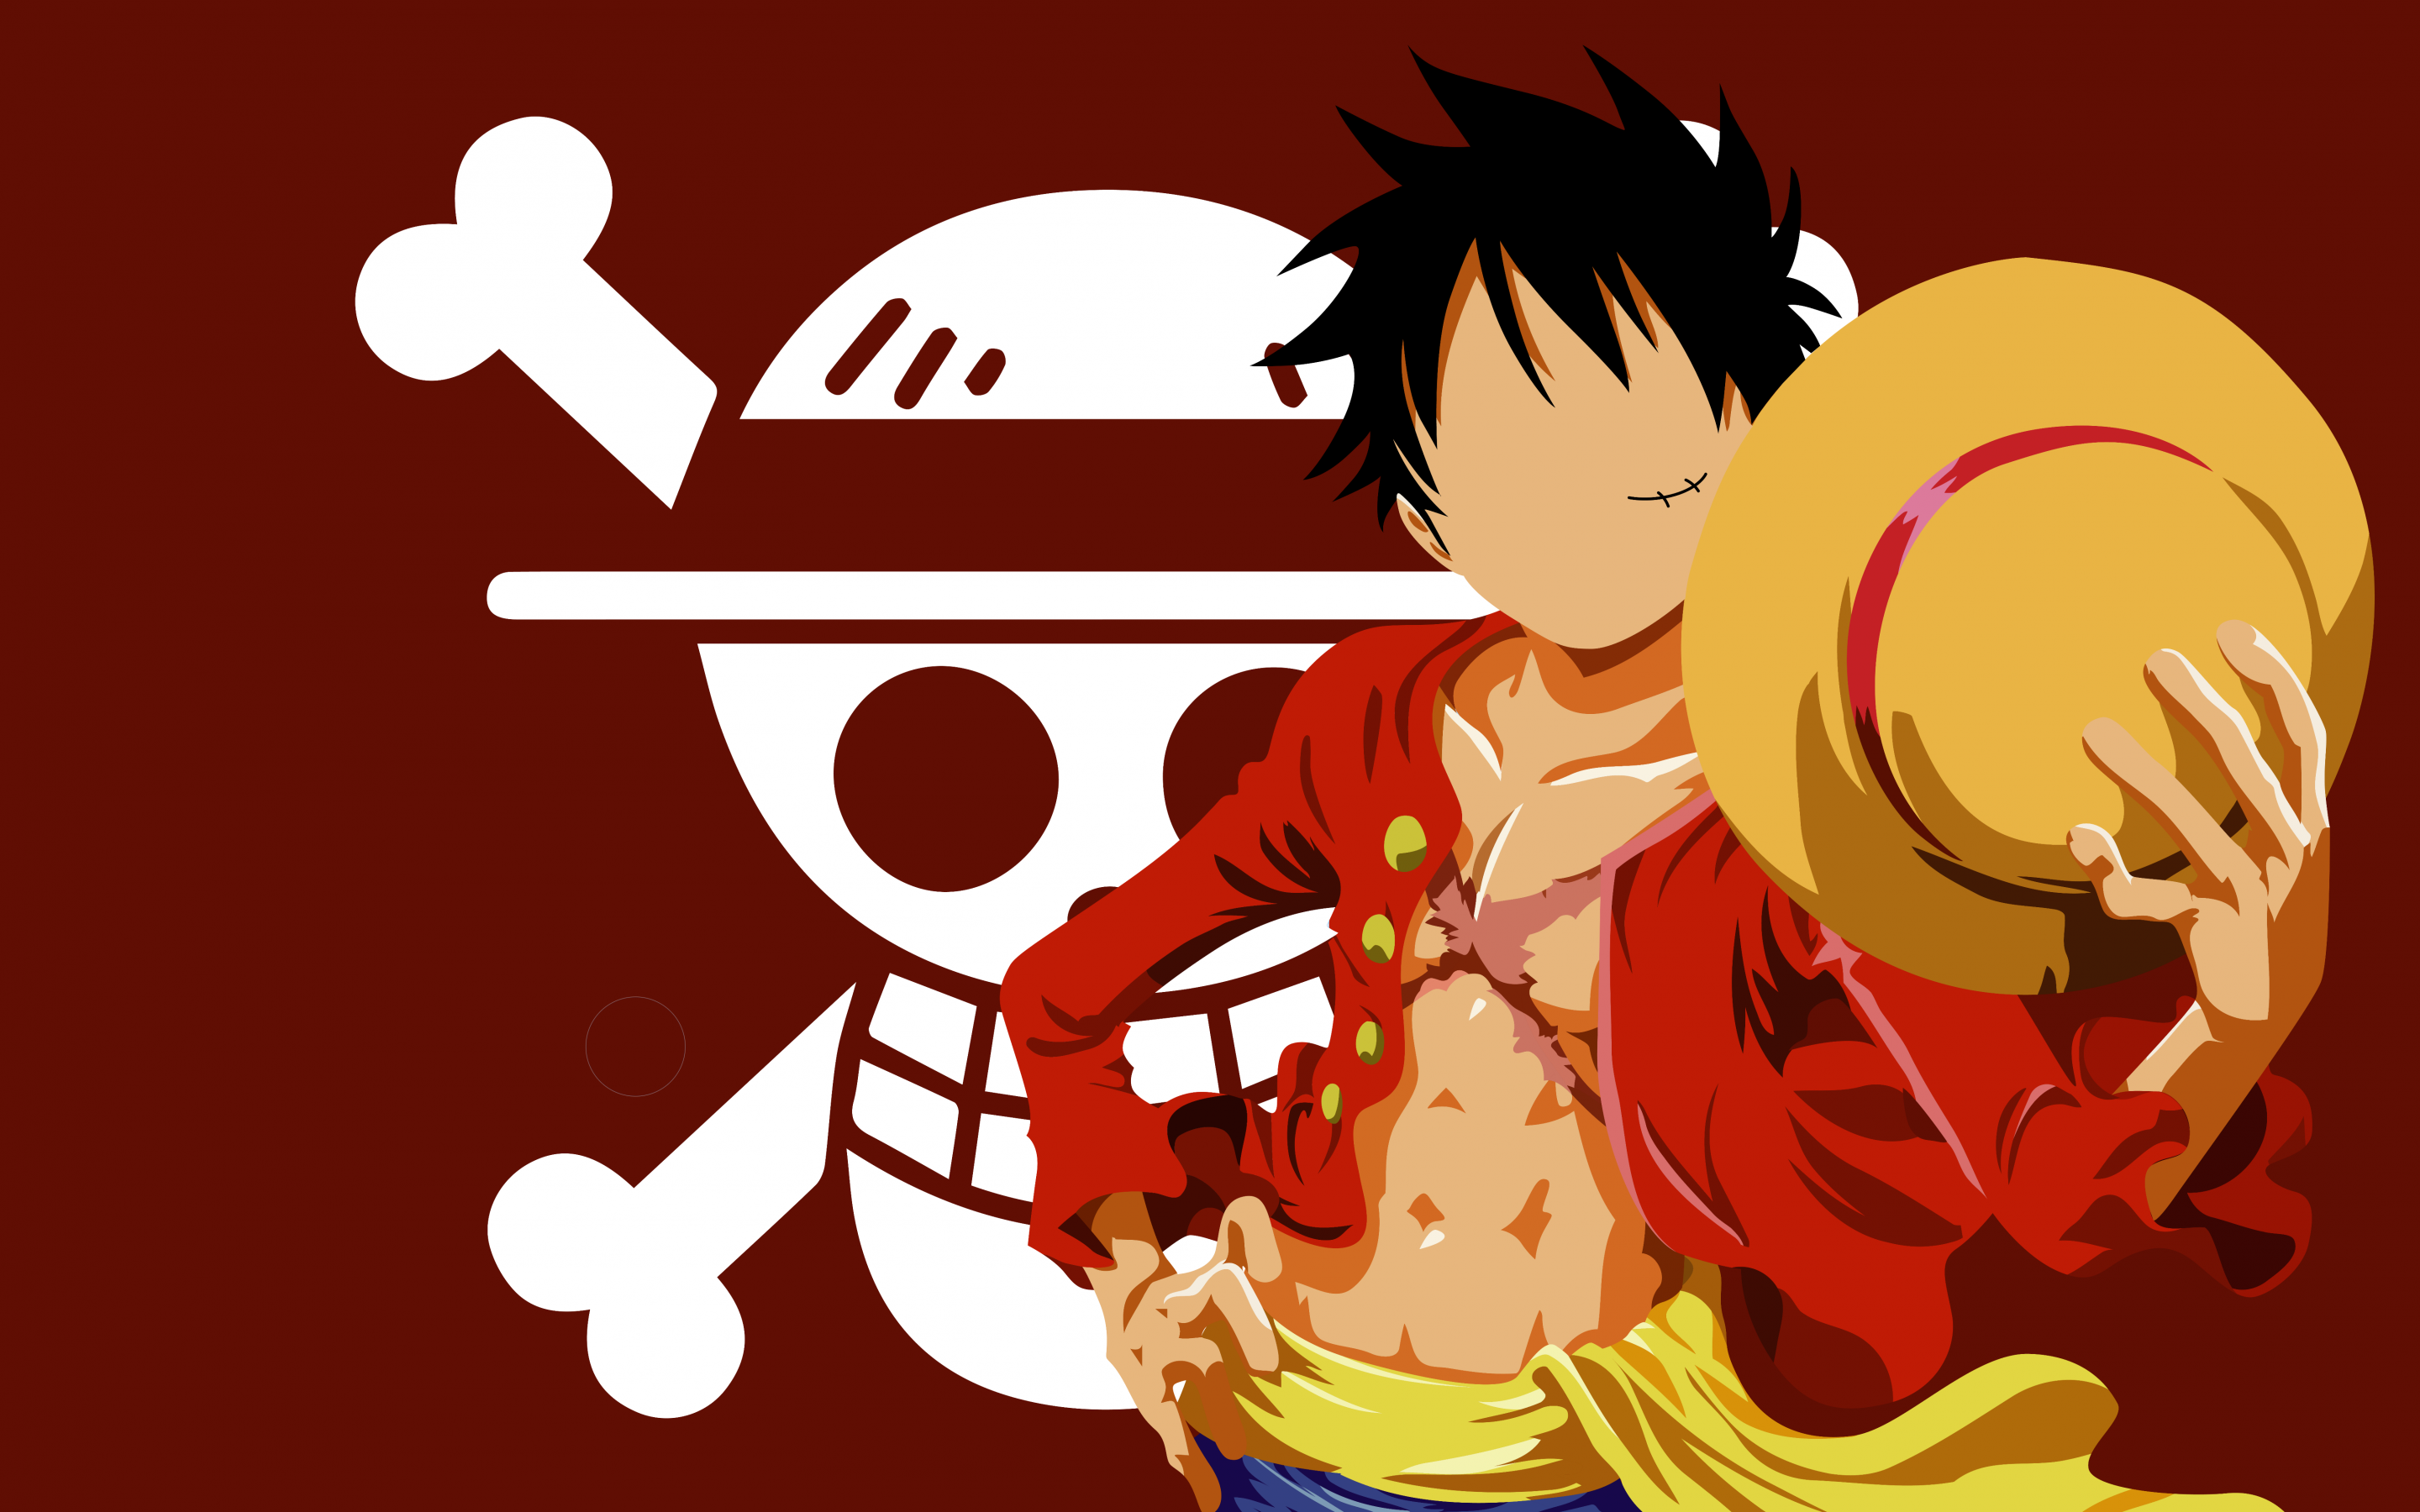 Anime One Piece 4k Wallpapers - Wallpaper Cave